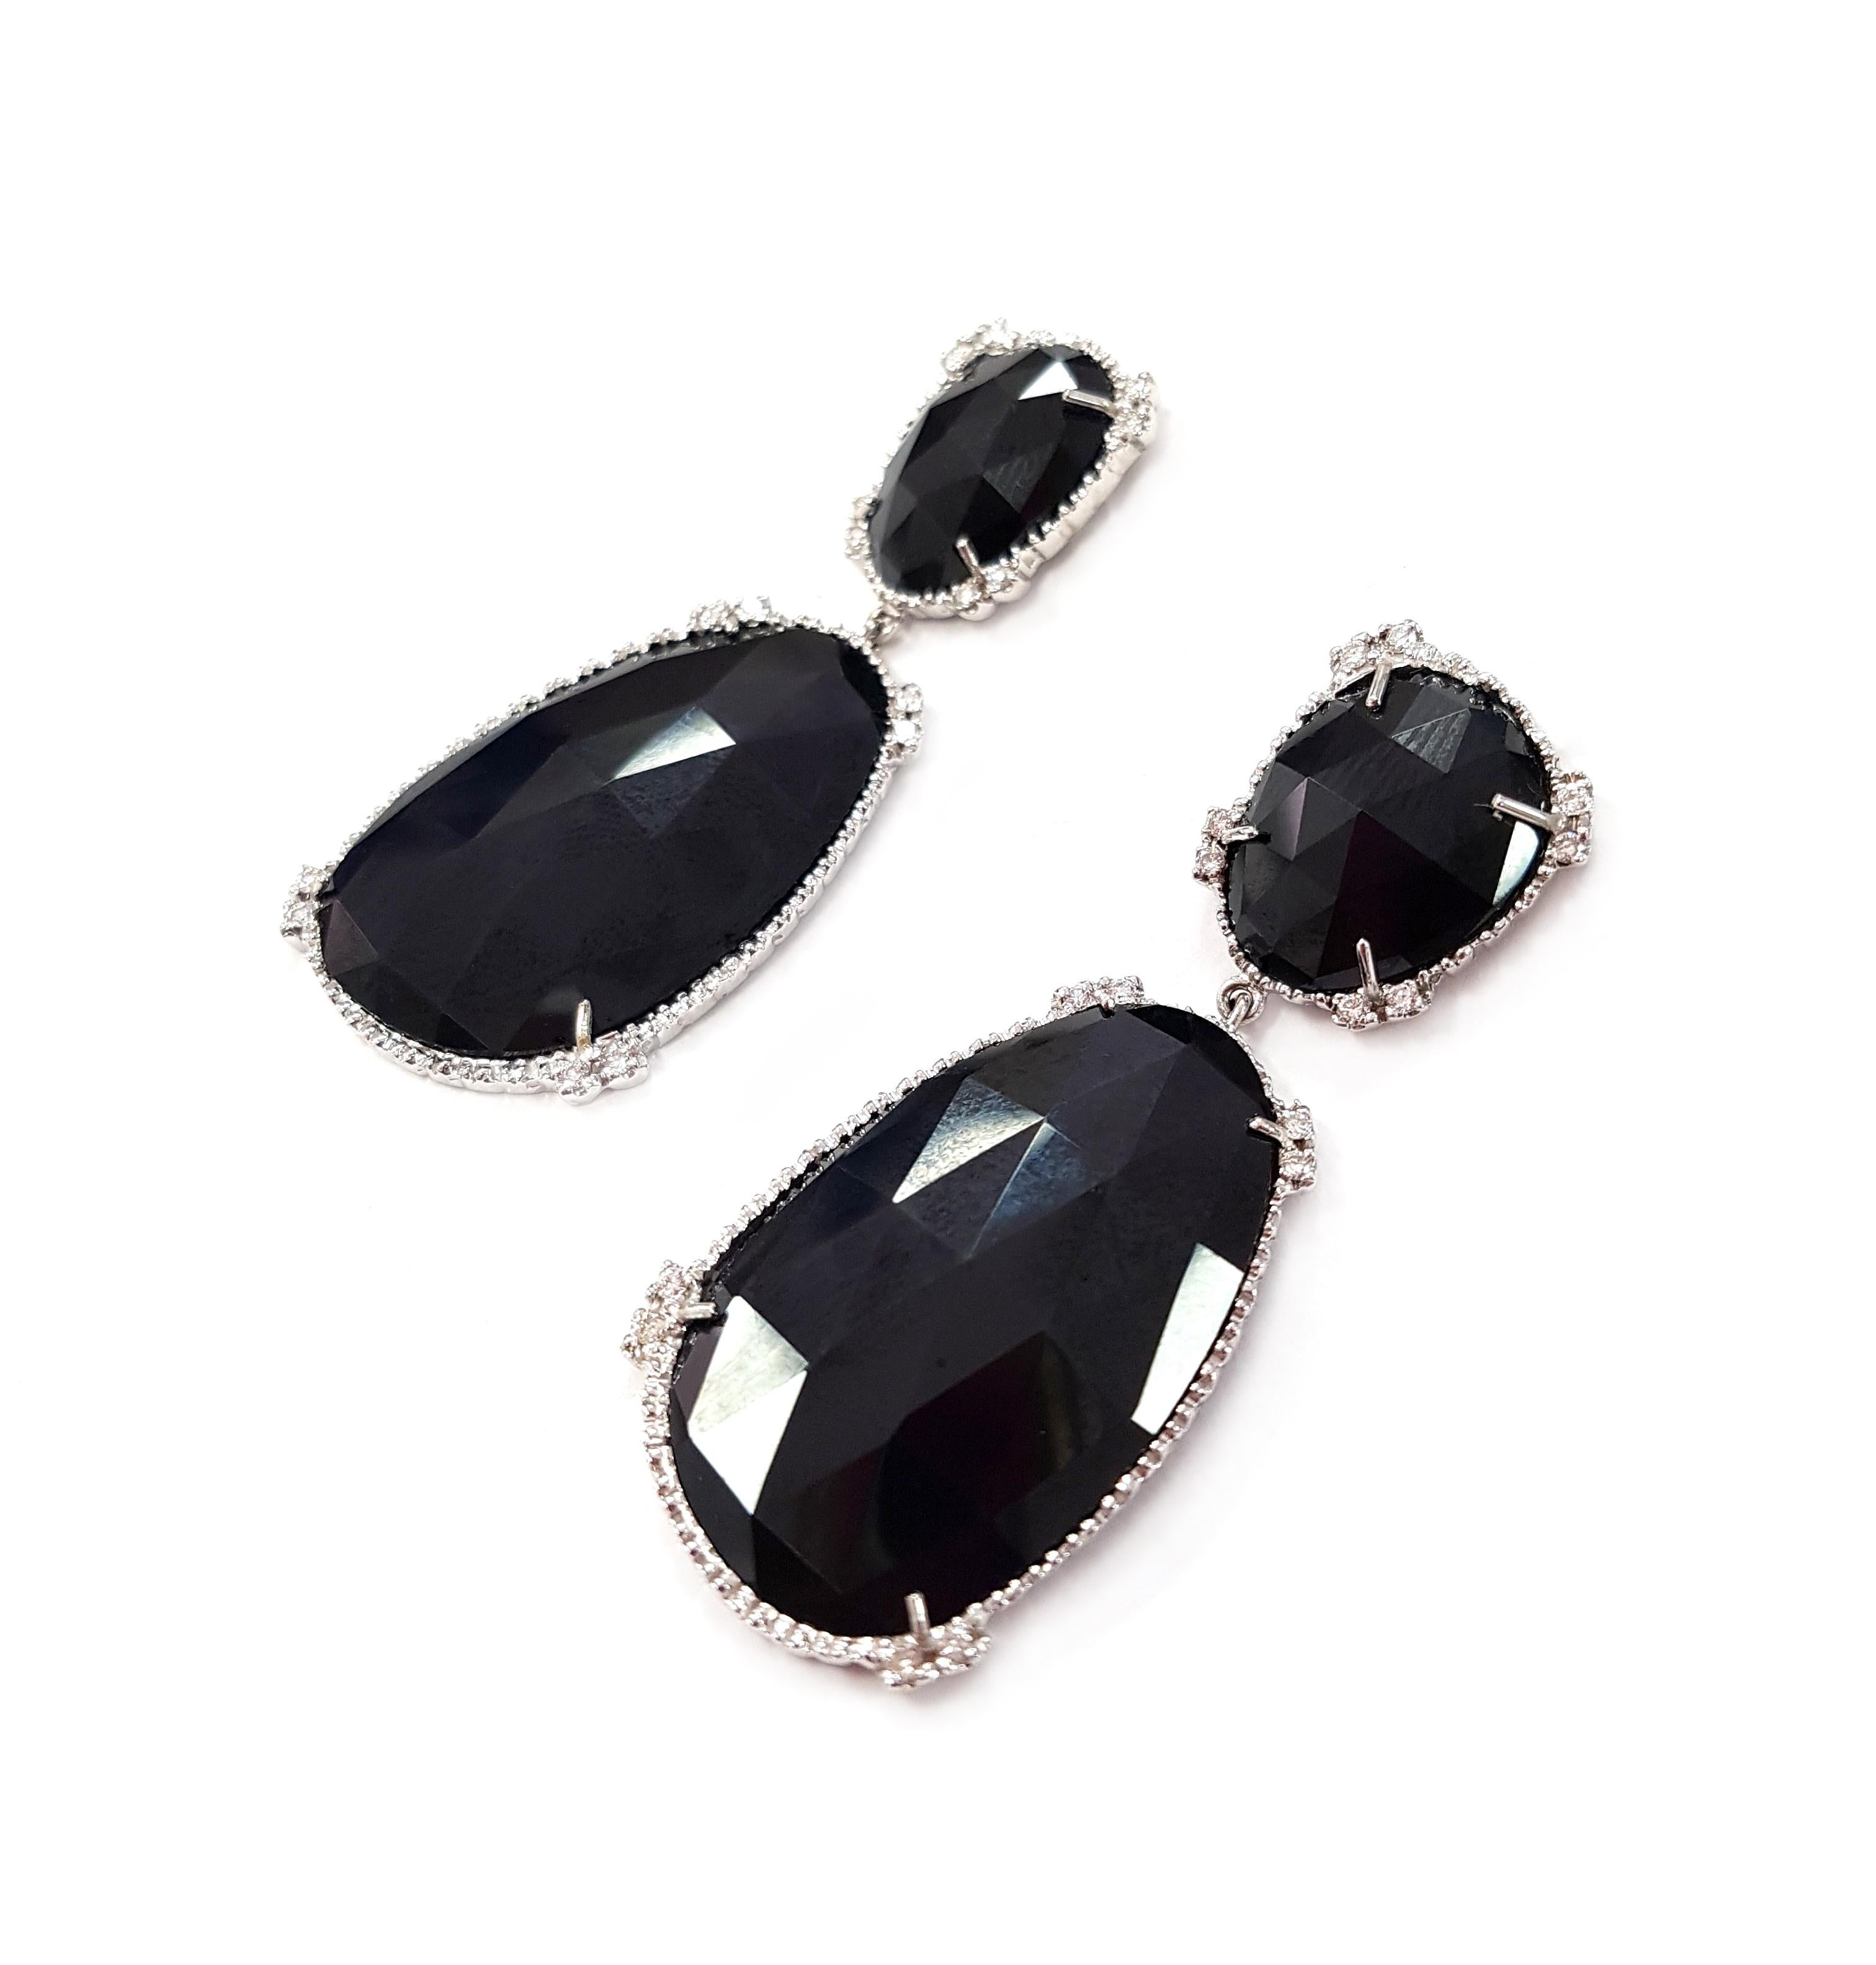 A stunning pair of post-back 18-karat white gold pendant earrings in the style of Art Deco. The high-lustre, faceted black stones are set in white gold and four pairs of small diamonds.

They hang about 5 centimetres long and weigh (combined) 16.8